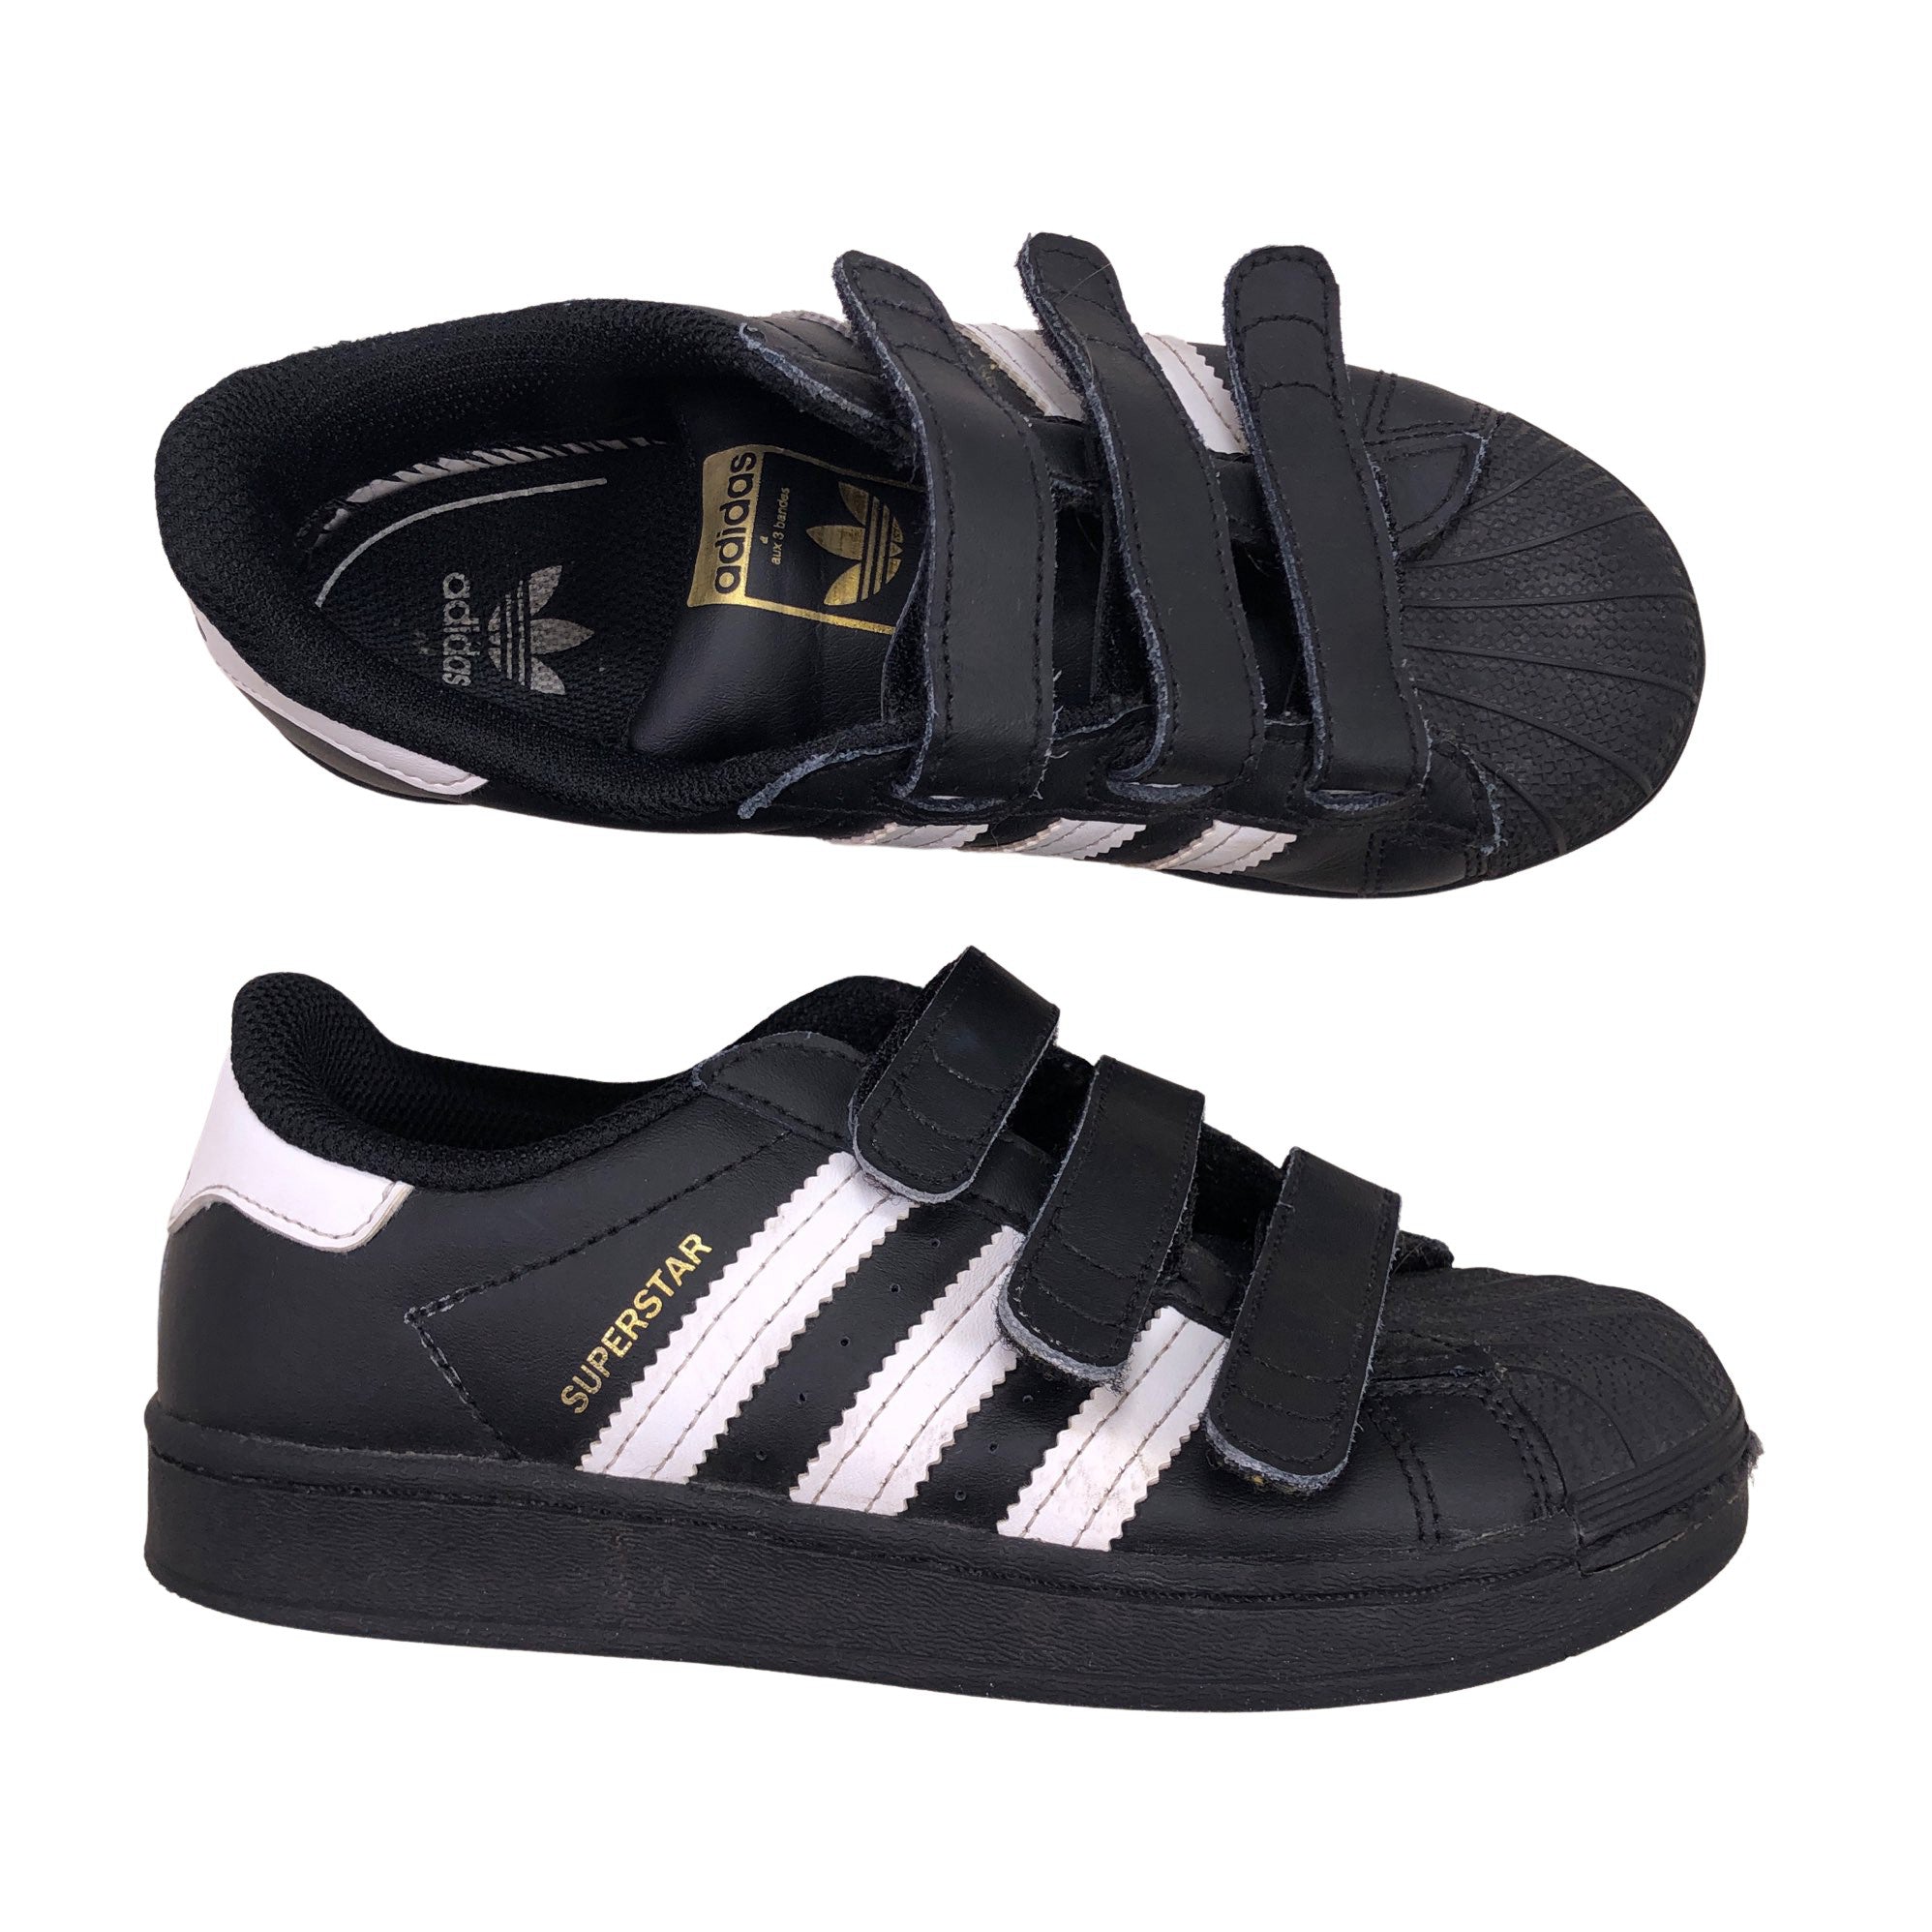 Unisex Adidas sneakers, size 33 Emmy